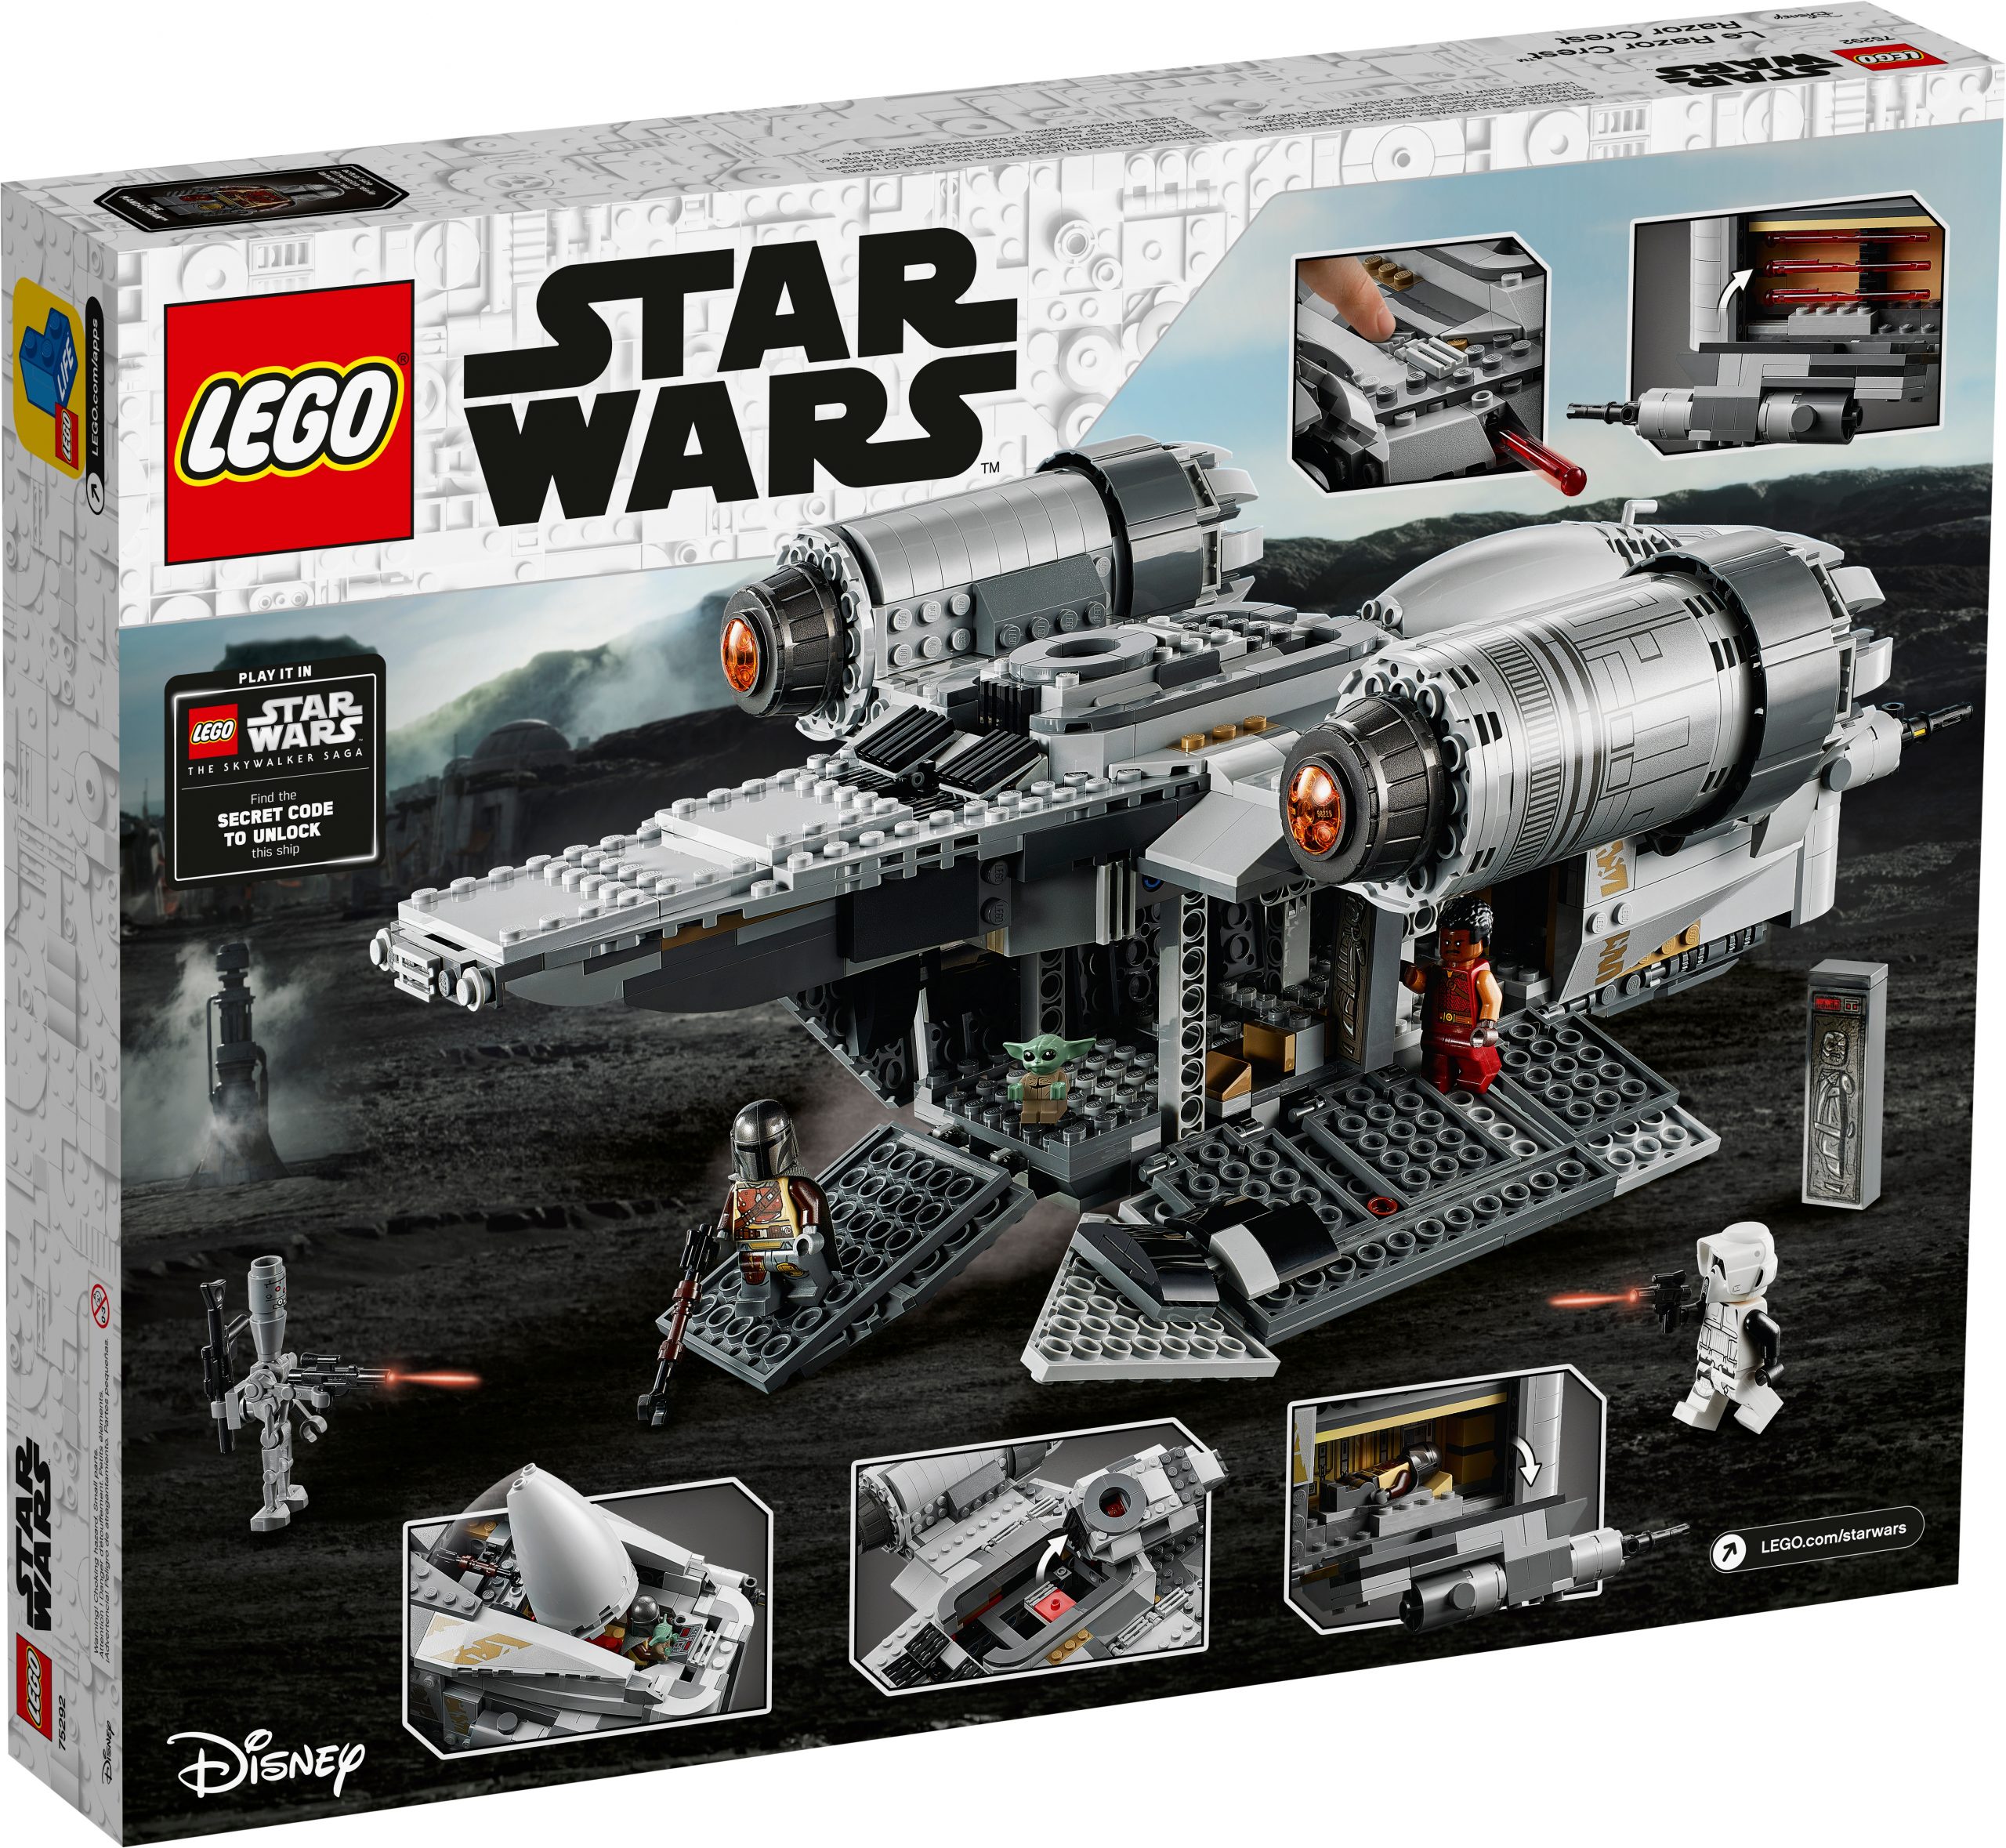 LEGO Star Wars Summer 2020 Sets Officially Announced - The Brick Fan